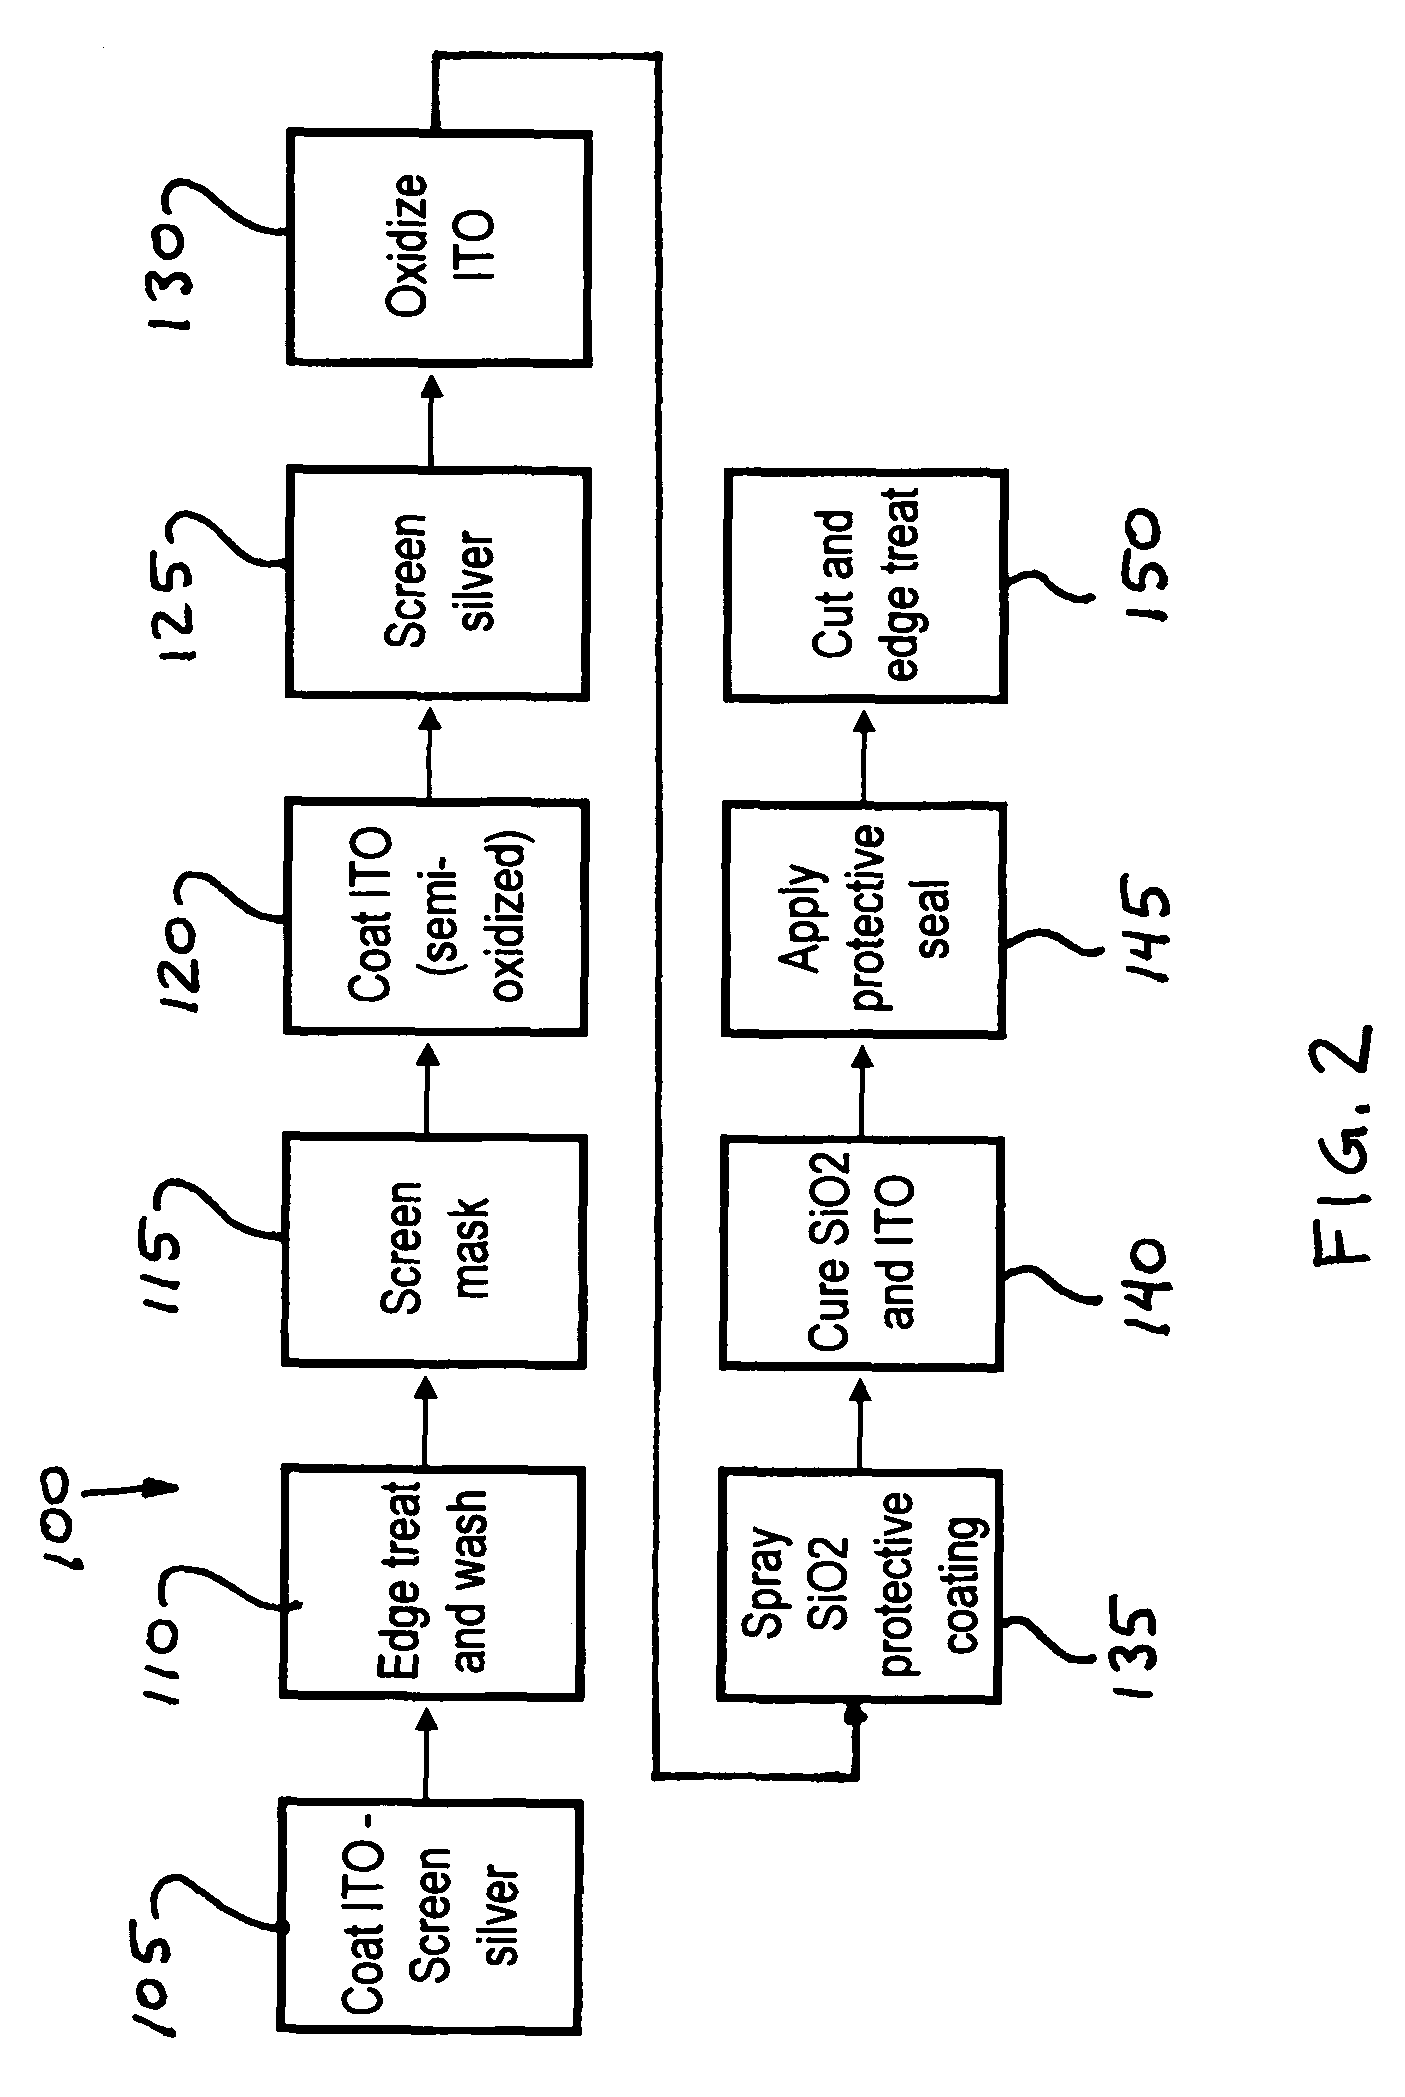 Capacitive touch screen and method of making same